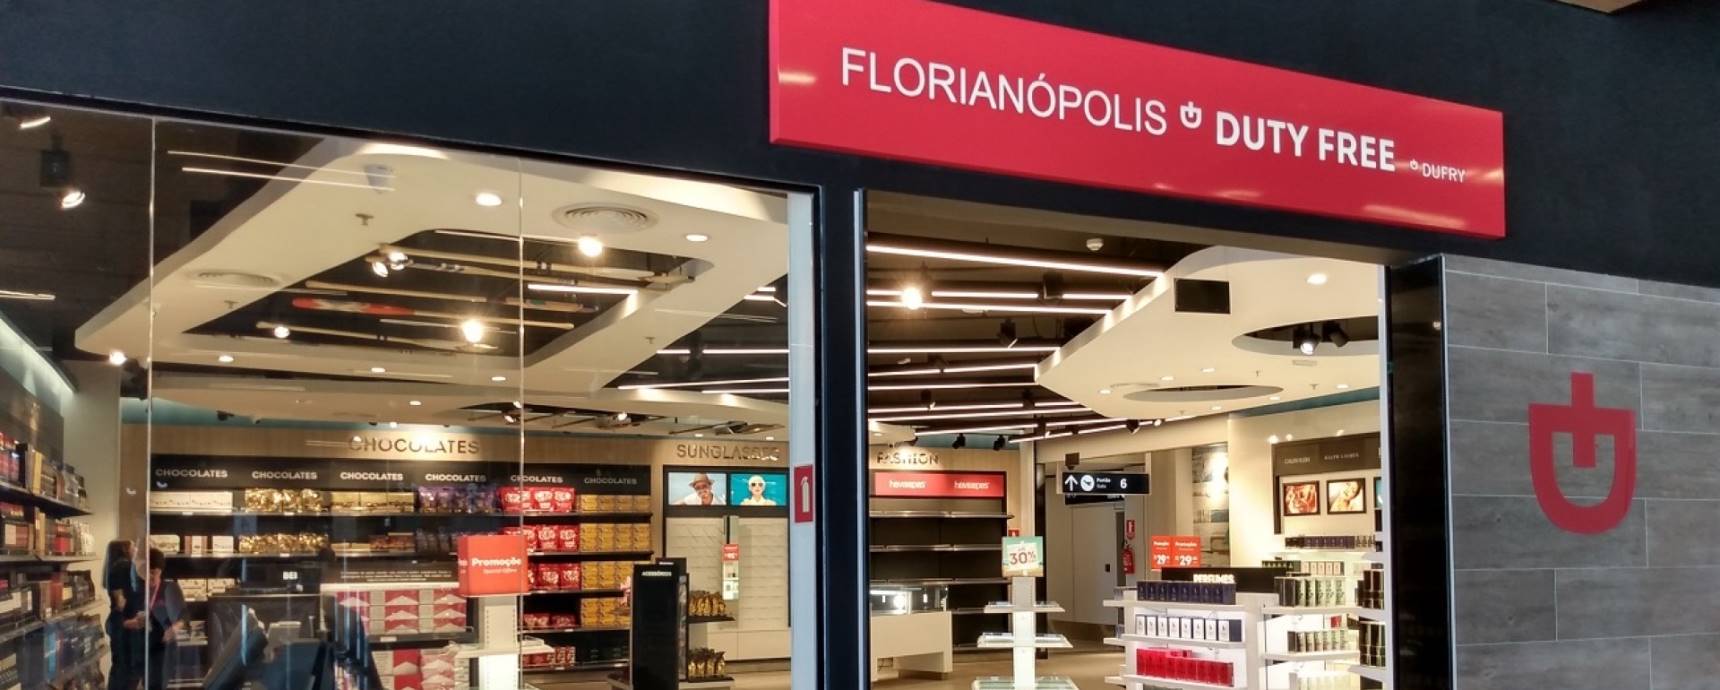 Two Duty Free units are opened at Florianópolis International Airport